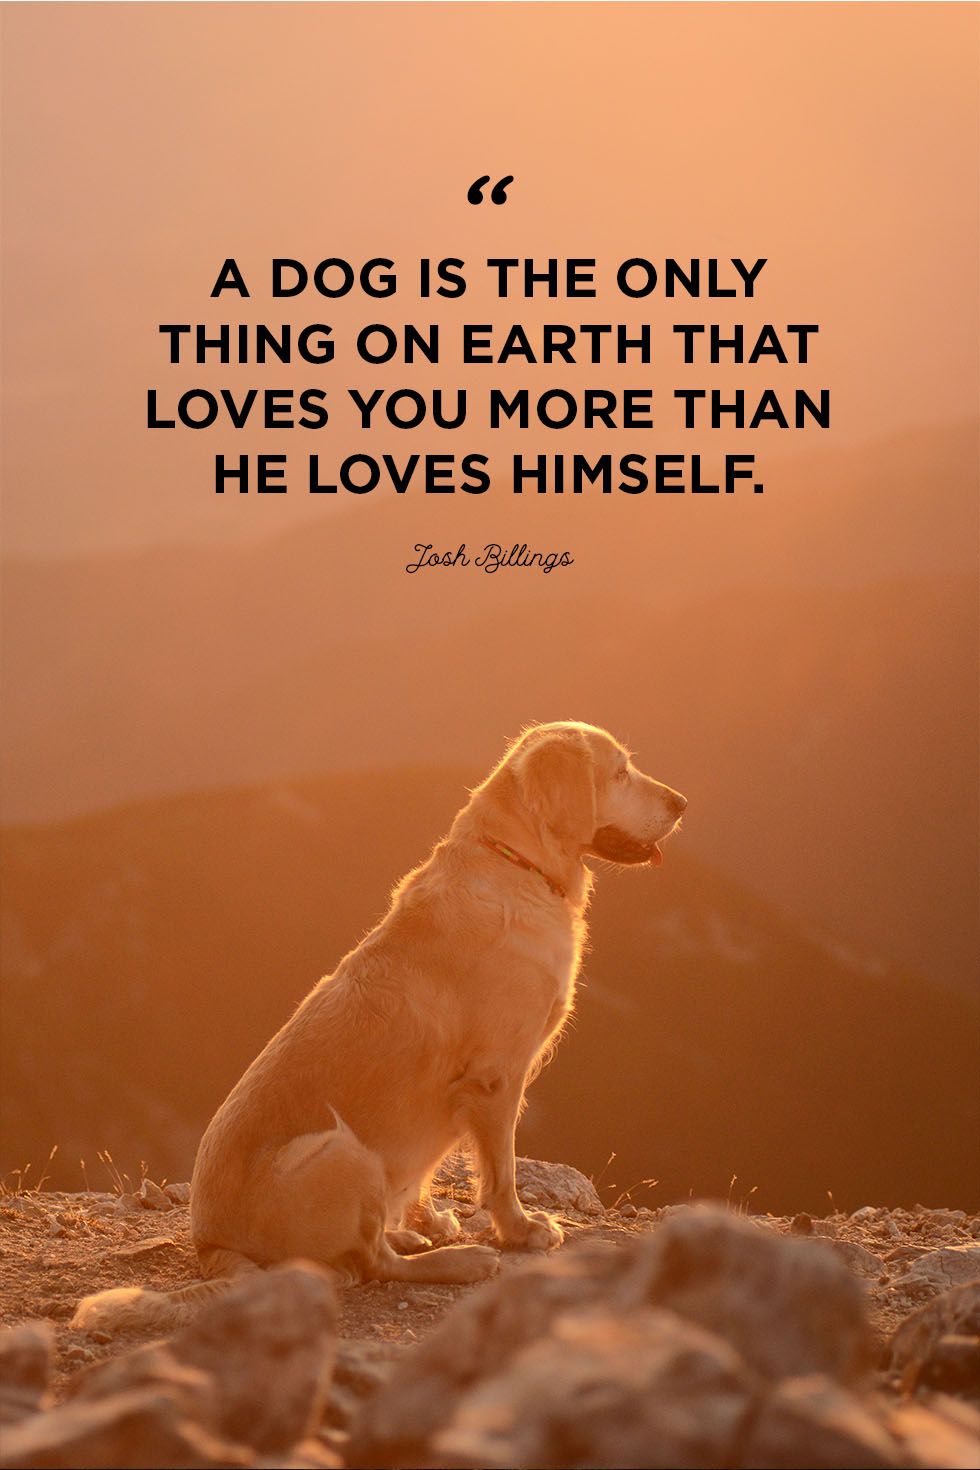 dog-quotes-psdloves-you-1550864955.jpg